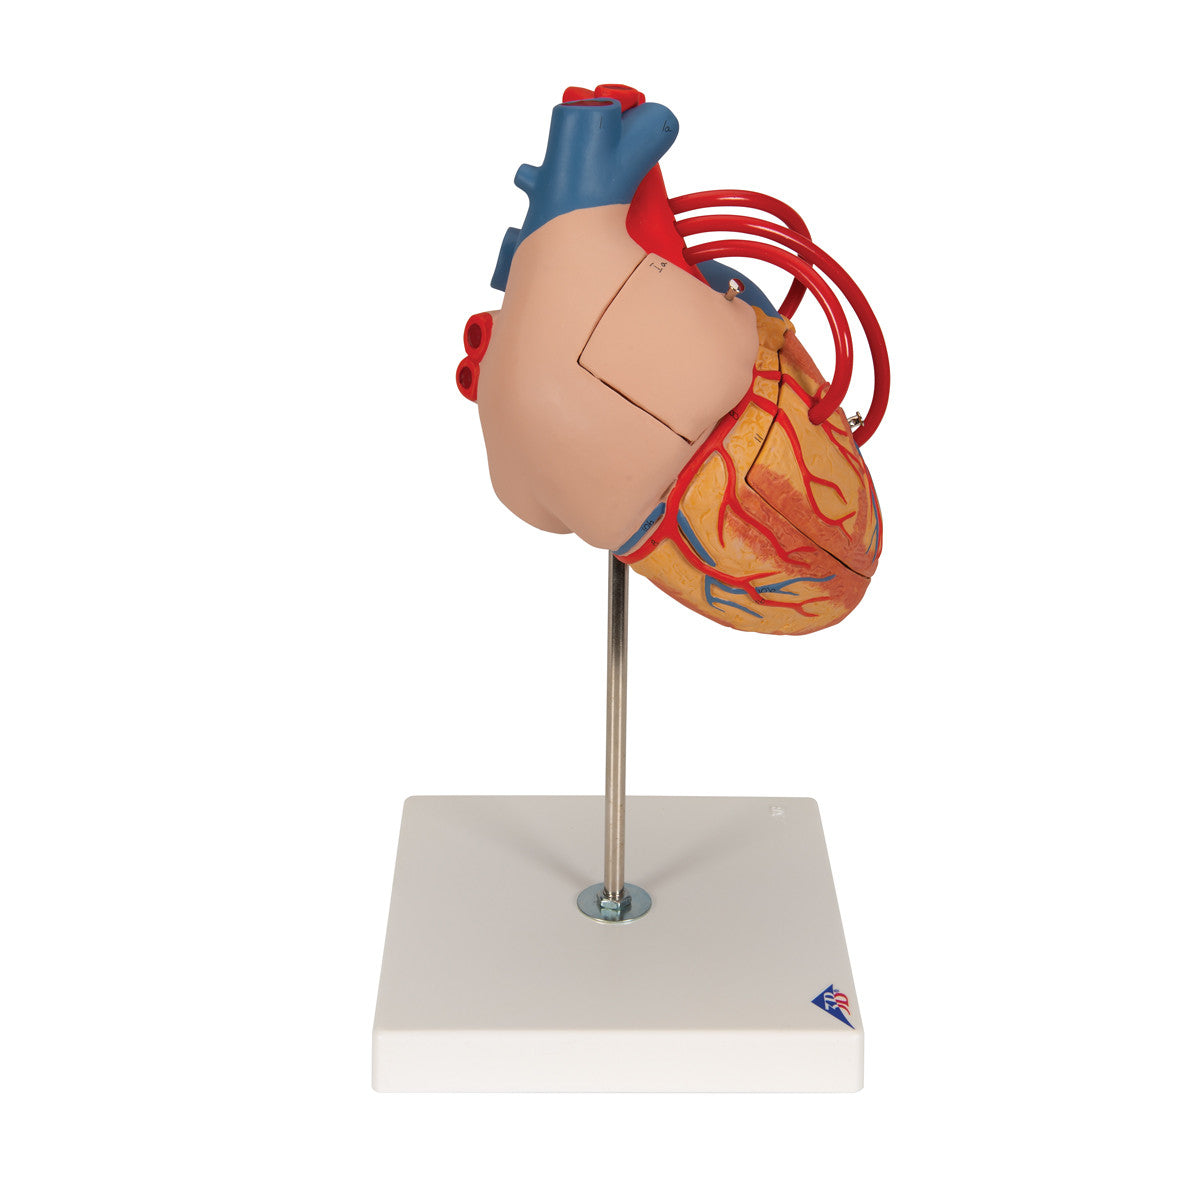 Heart Model with Bypass, 2 times life-size